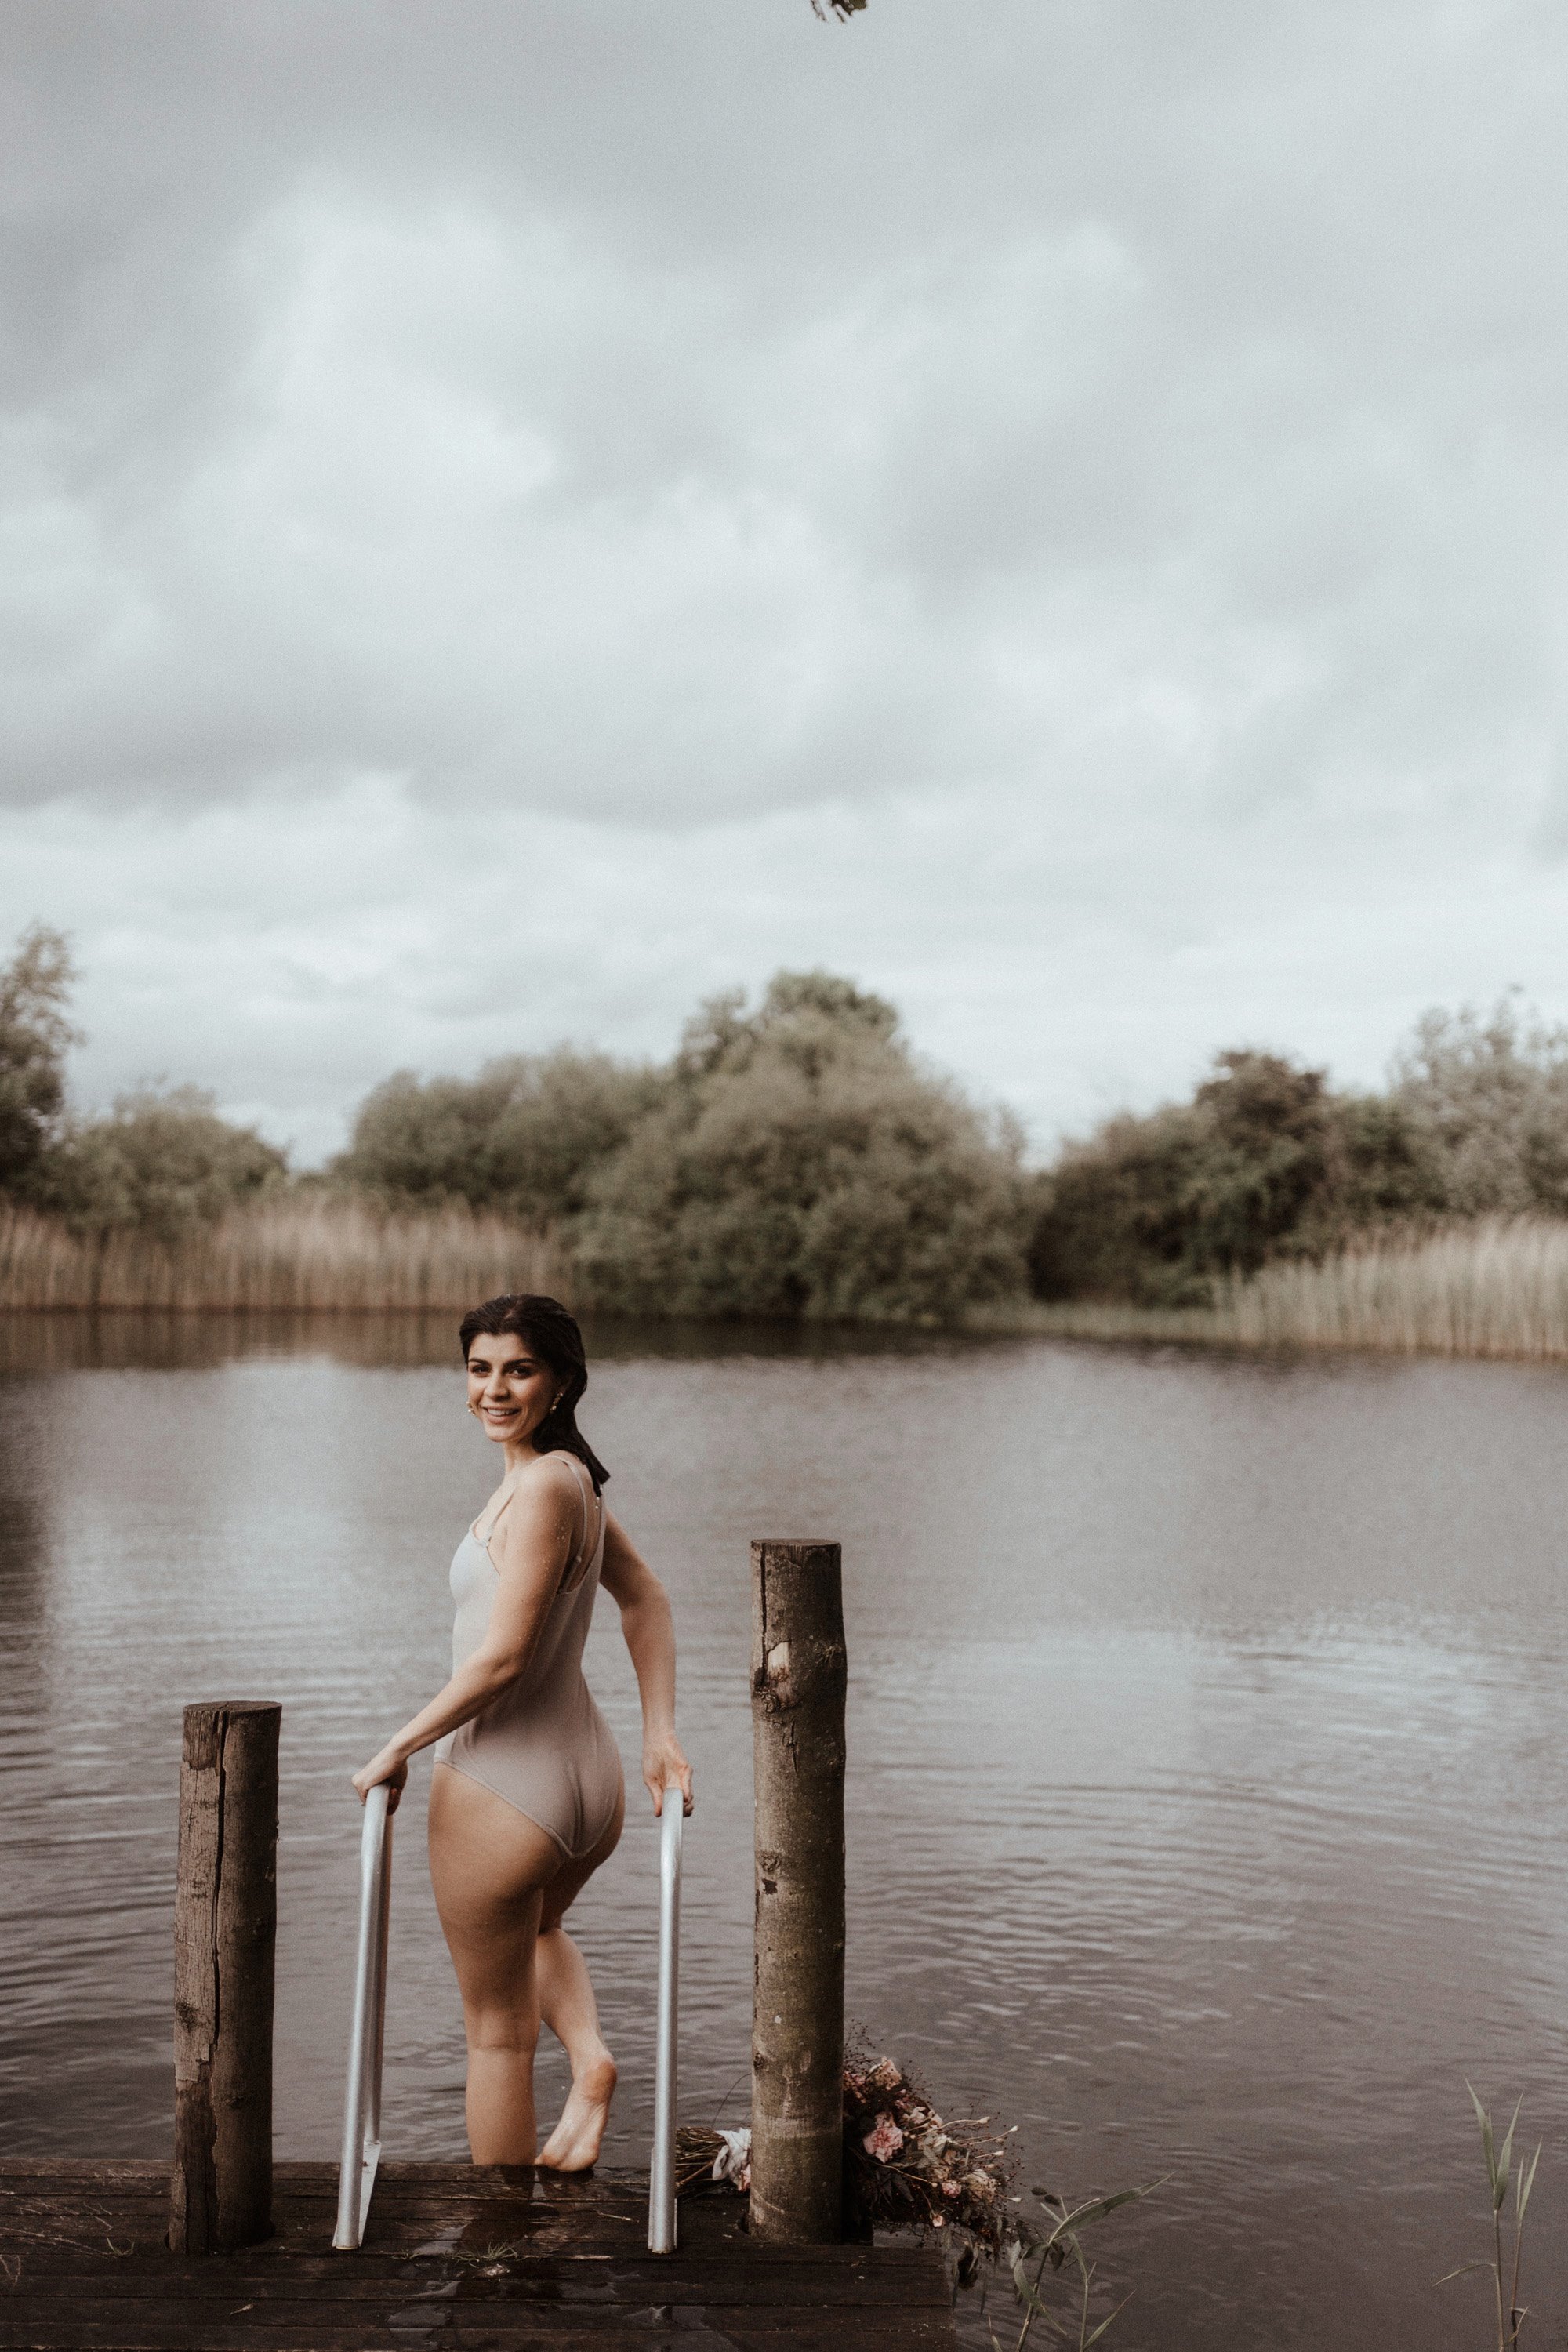 Bride getting in the lake for a wild swim before wedding at stately home elmore court in the Cotswolds countryside